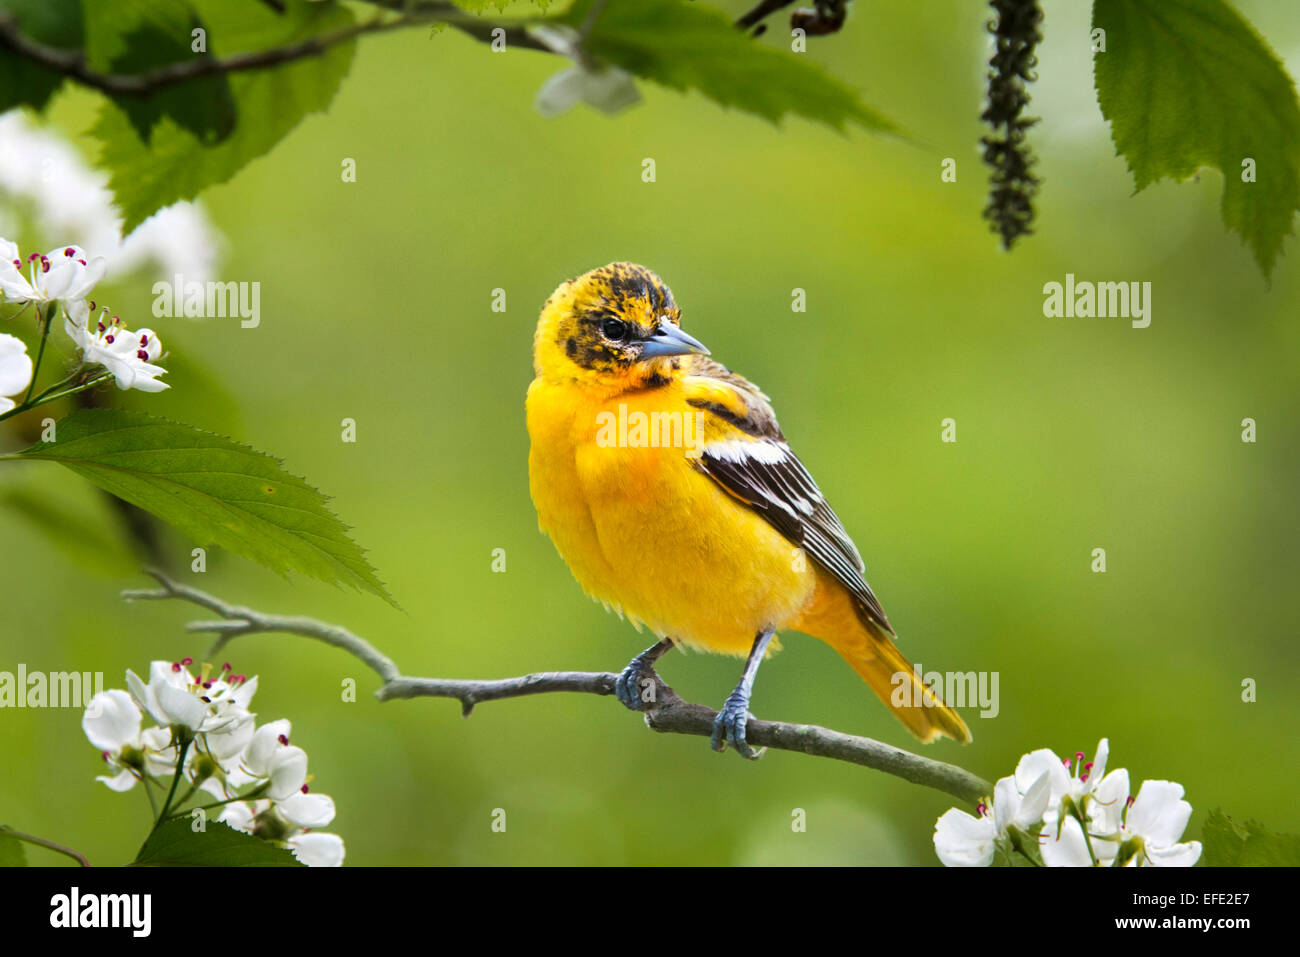 Baltimore Oriole bird perched on branch with flowers in spring. Stock Photo